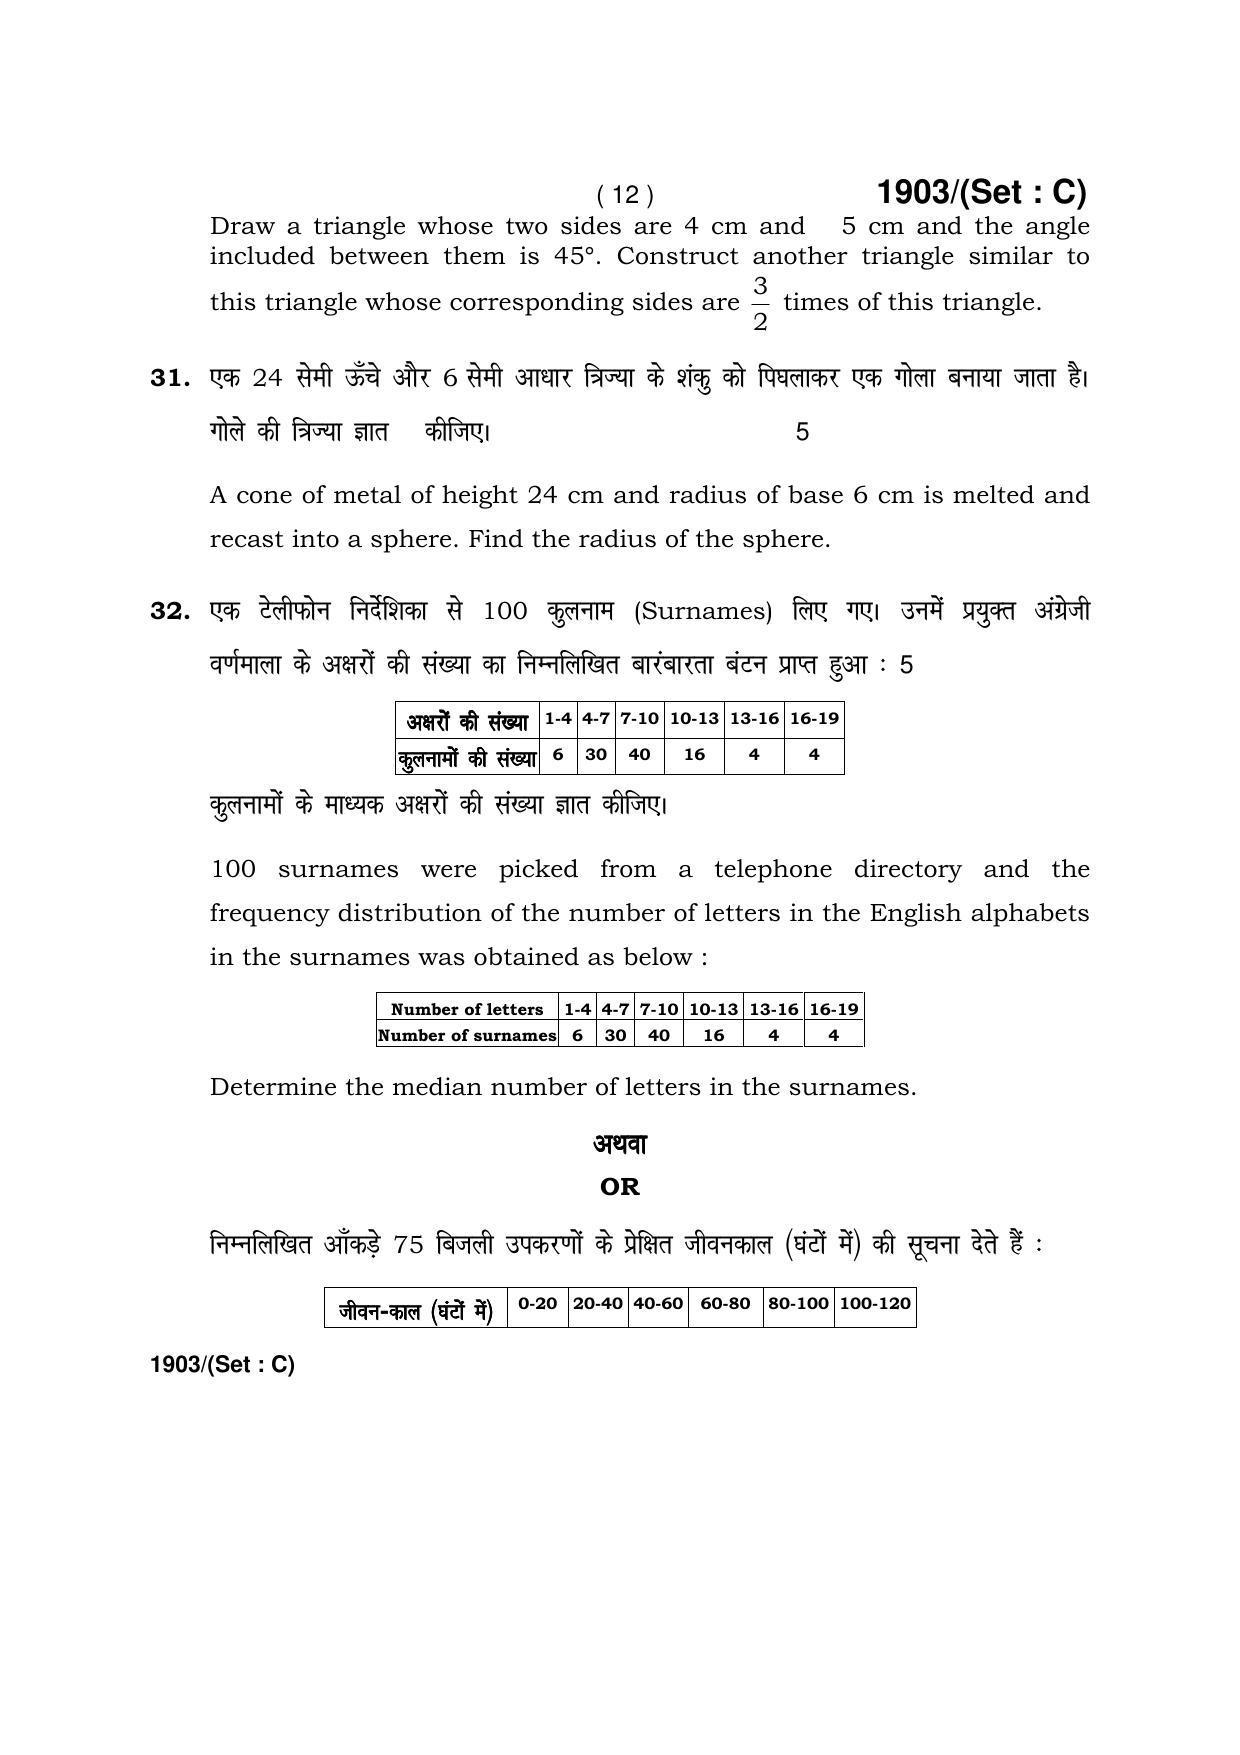 Haryana Board HBSE Class 10 Mathematics -C 2017 Question Paper - Page 12